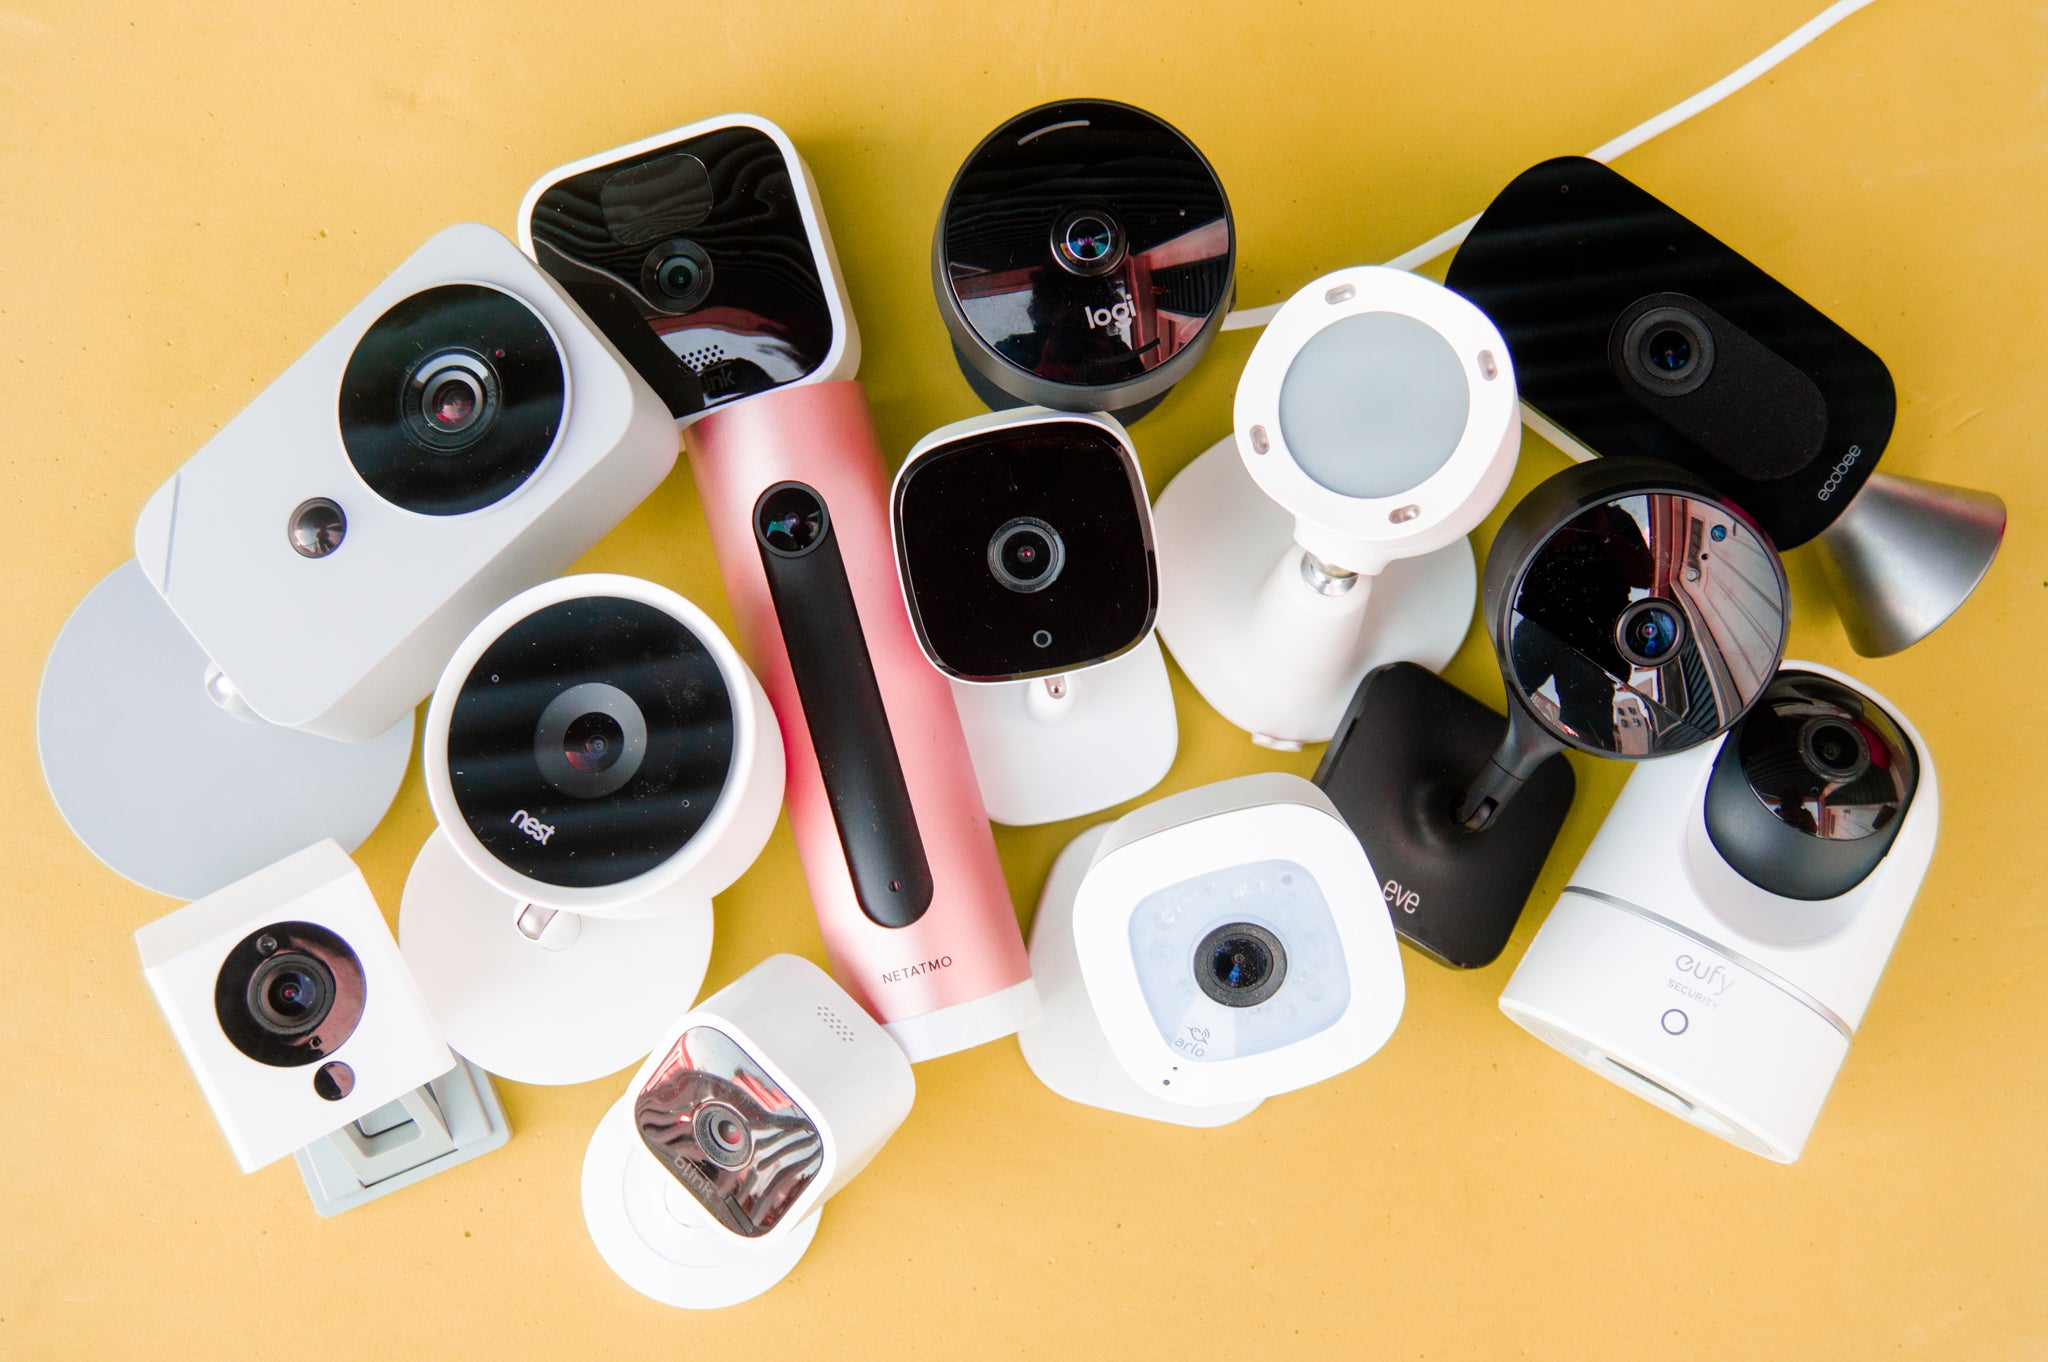 Top Indoor Security Camera Review: Find the Best Option